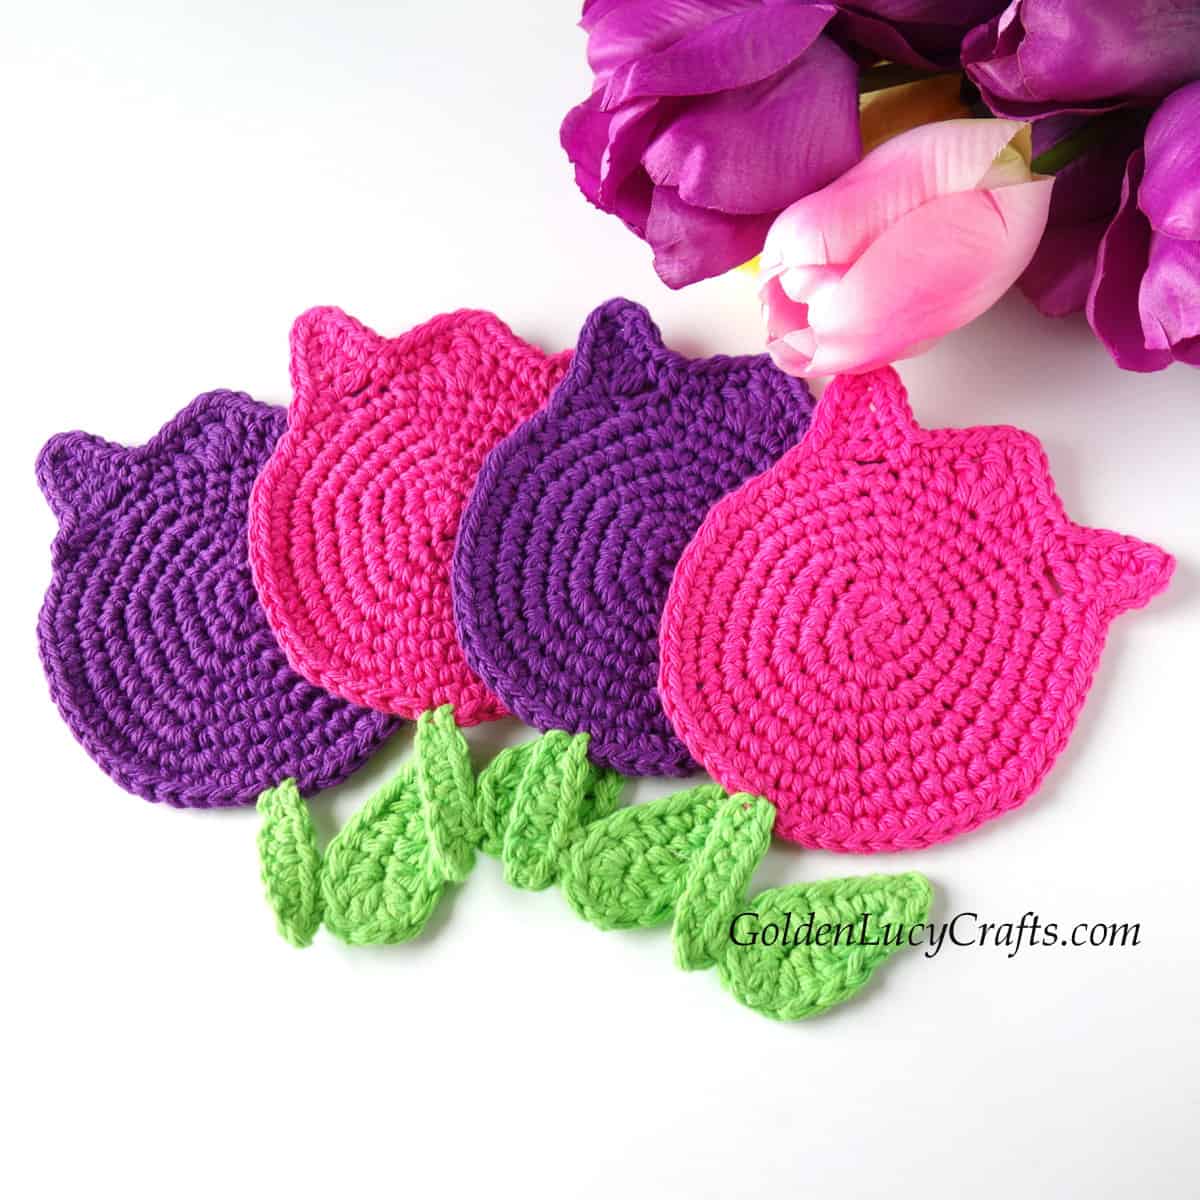 Crocheted tulip coasters in pink and purple colors.